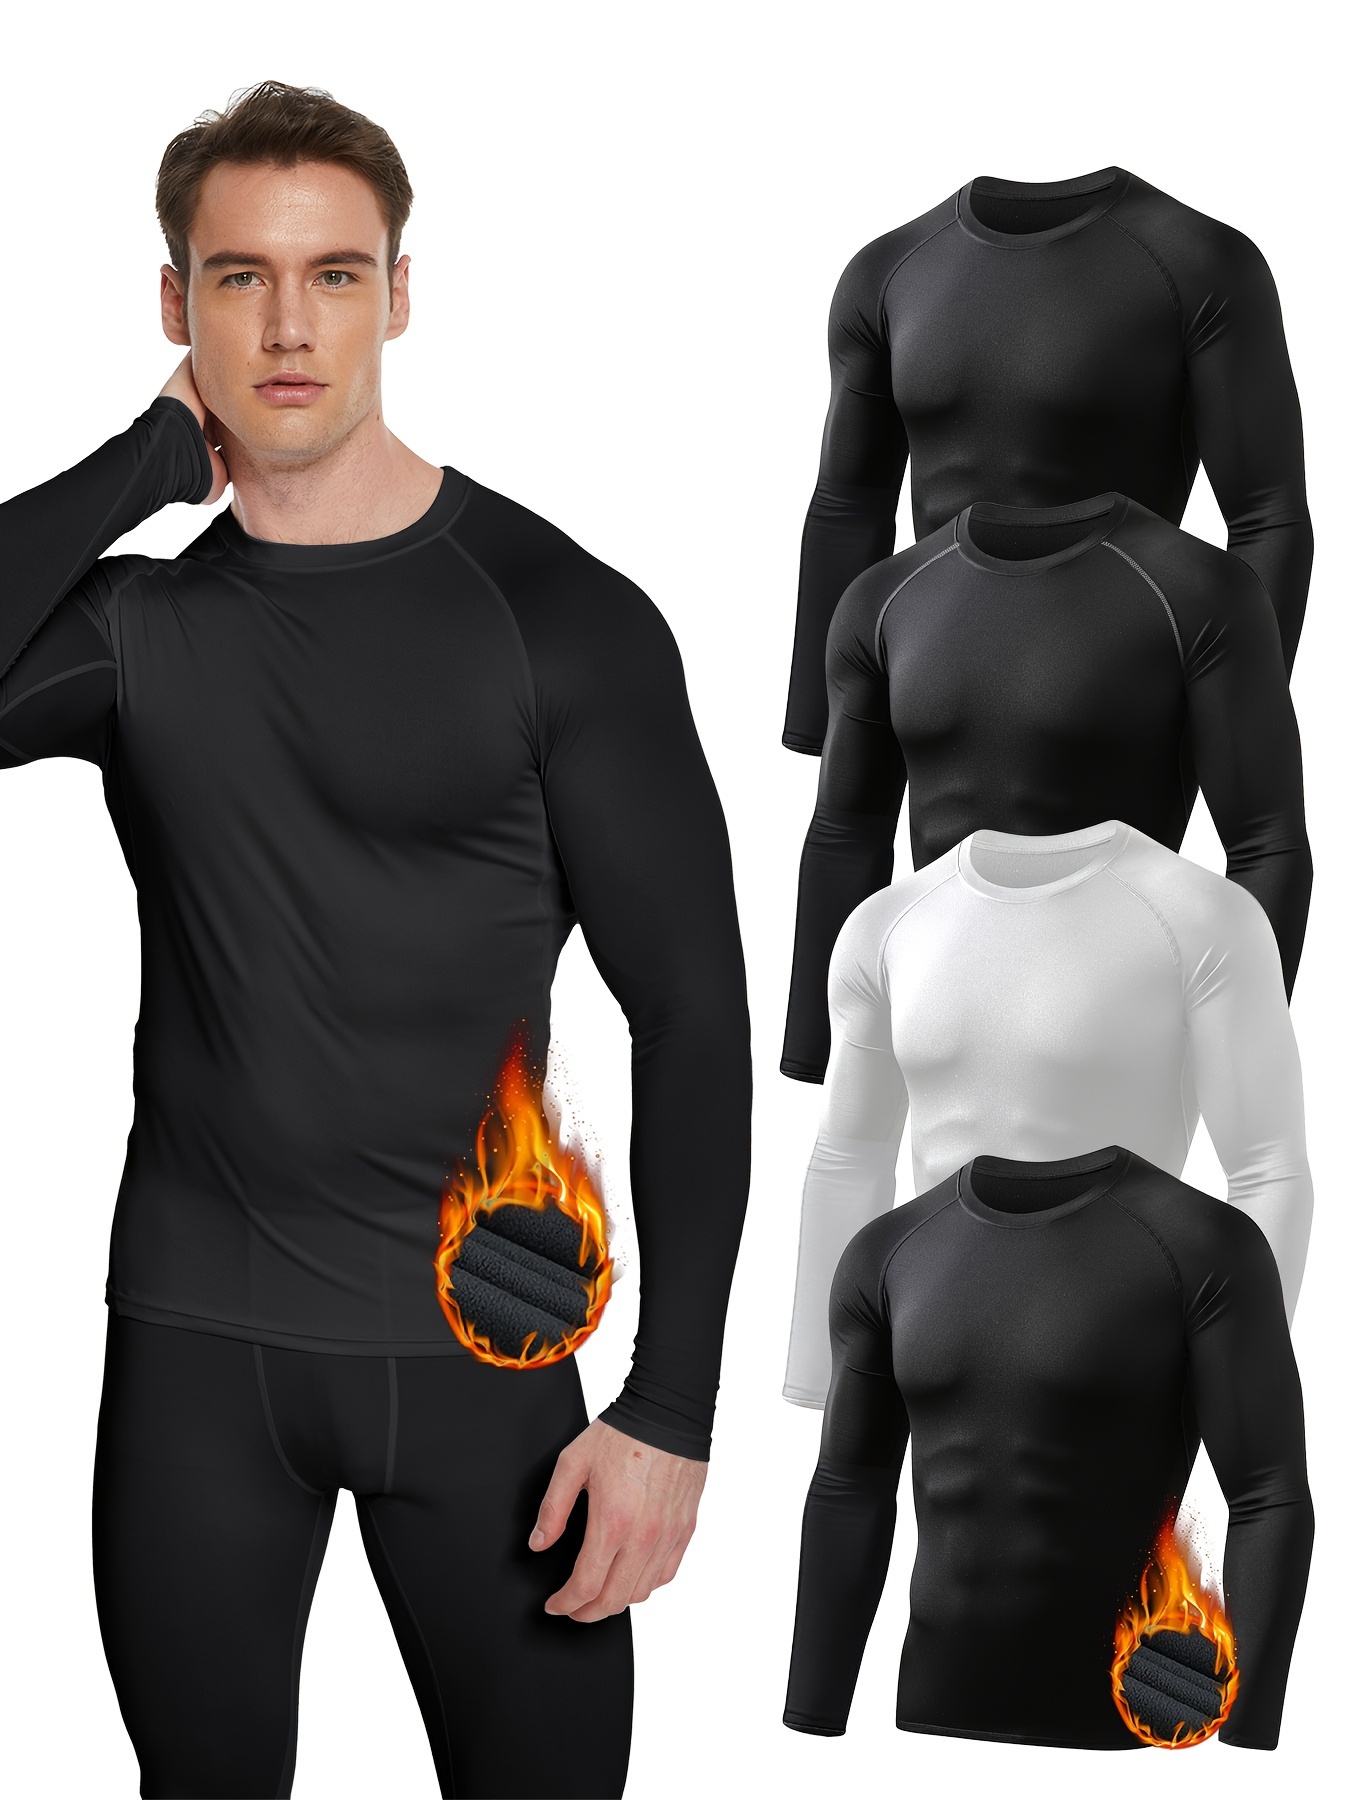 4pcs Compression Shirts Men Long Sleeve Athletic Cold Weather Thermal  Baselayer Undershirt Gear Tshirt For Sports Workout